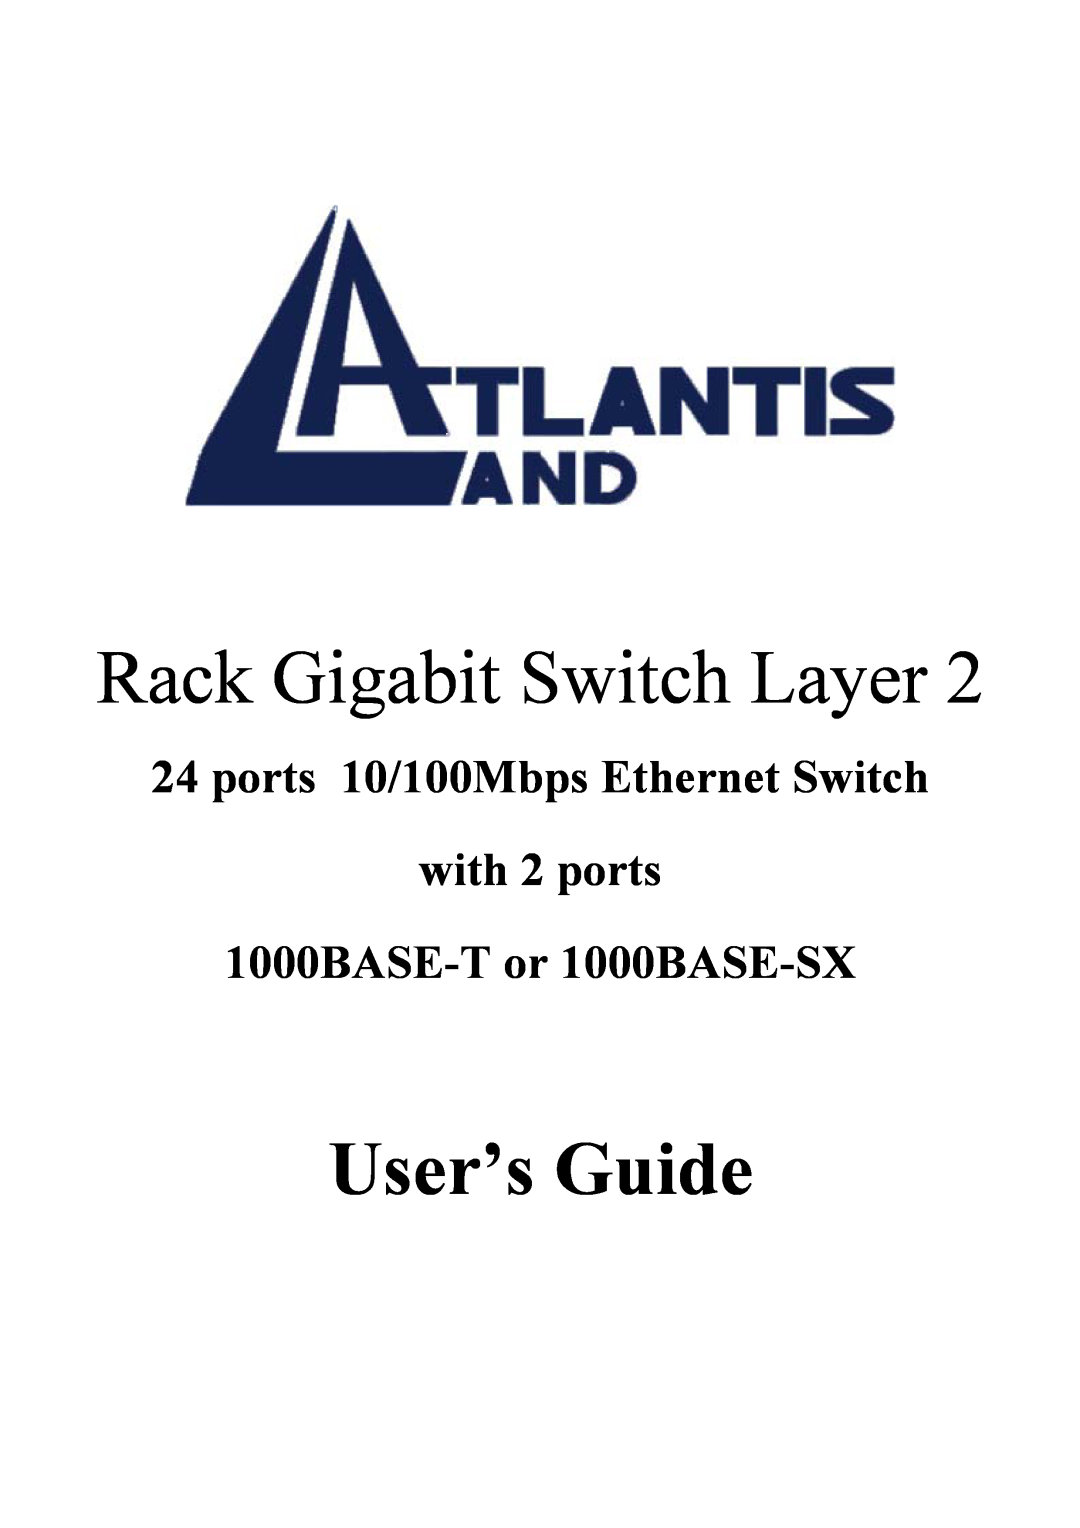 Atlantis Land 1000BASE-SX manual Rack Gigabit Switch Layer, User’s Guide, ports 10/100Mbps Ethernet Switch with 2 ports 